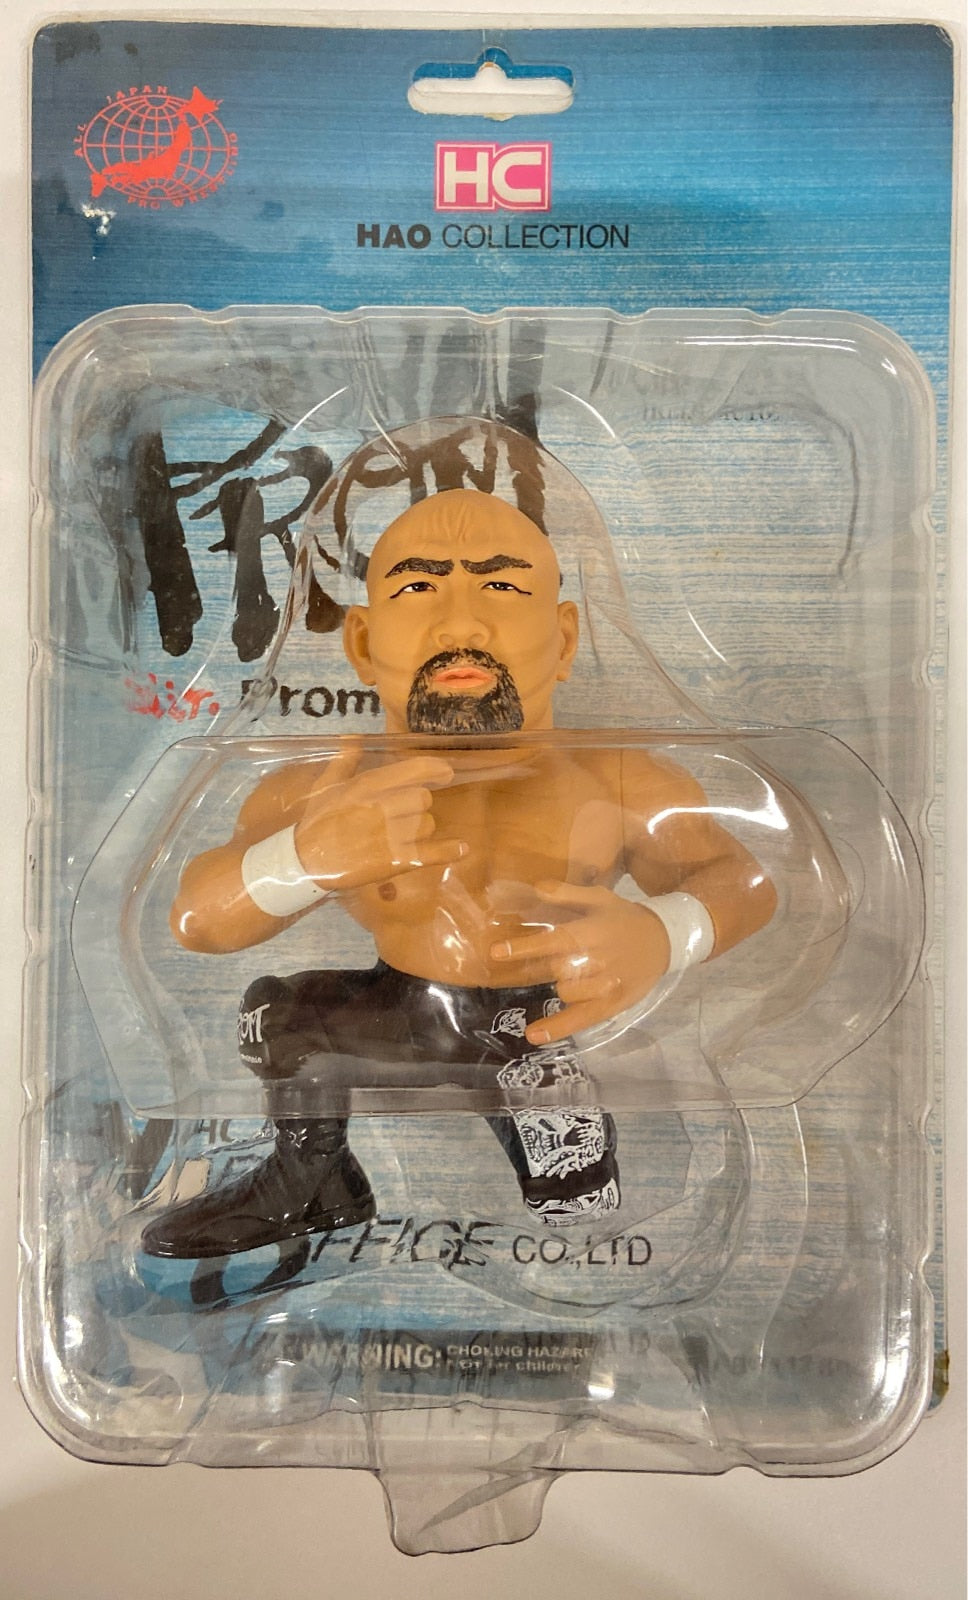 2005 AJPW HAO Collection Fighters Figure Limited Model Keiji Muto [With Hands Down]